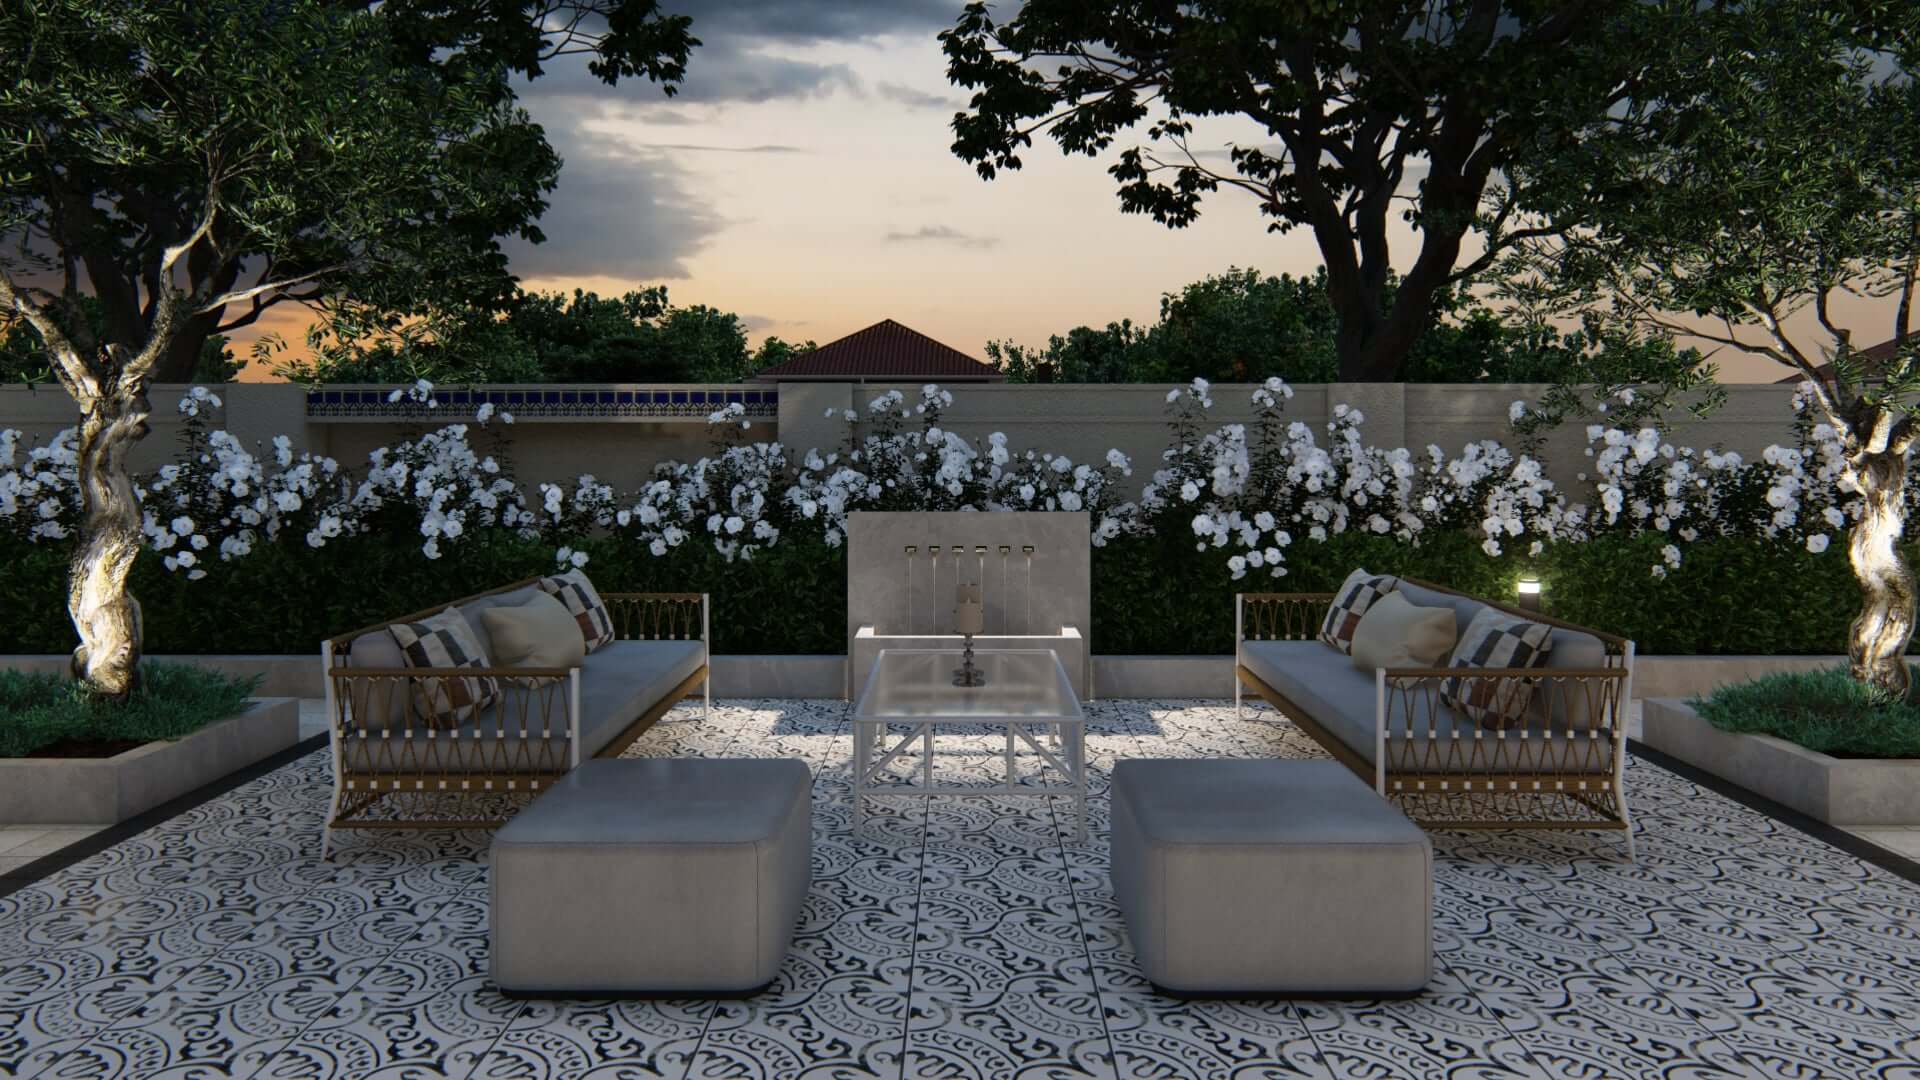 a design render at night, including a seating area and fountain, surrounded by white plants bright in the moonlight